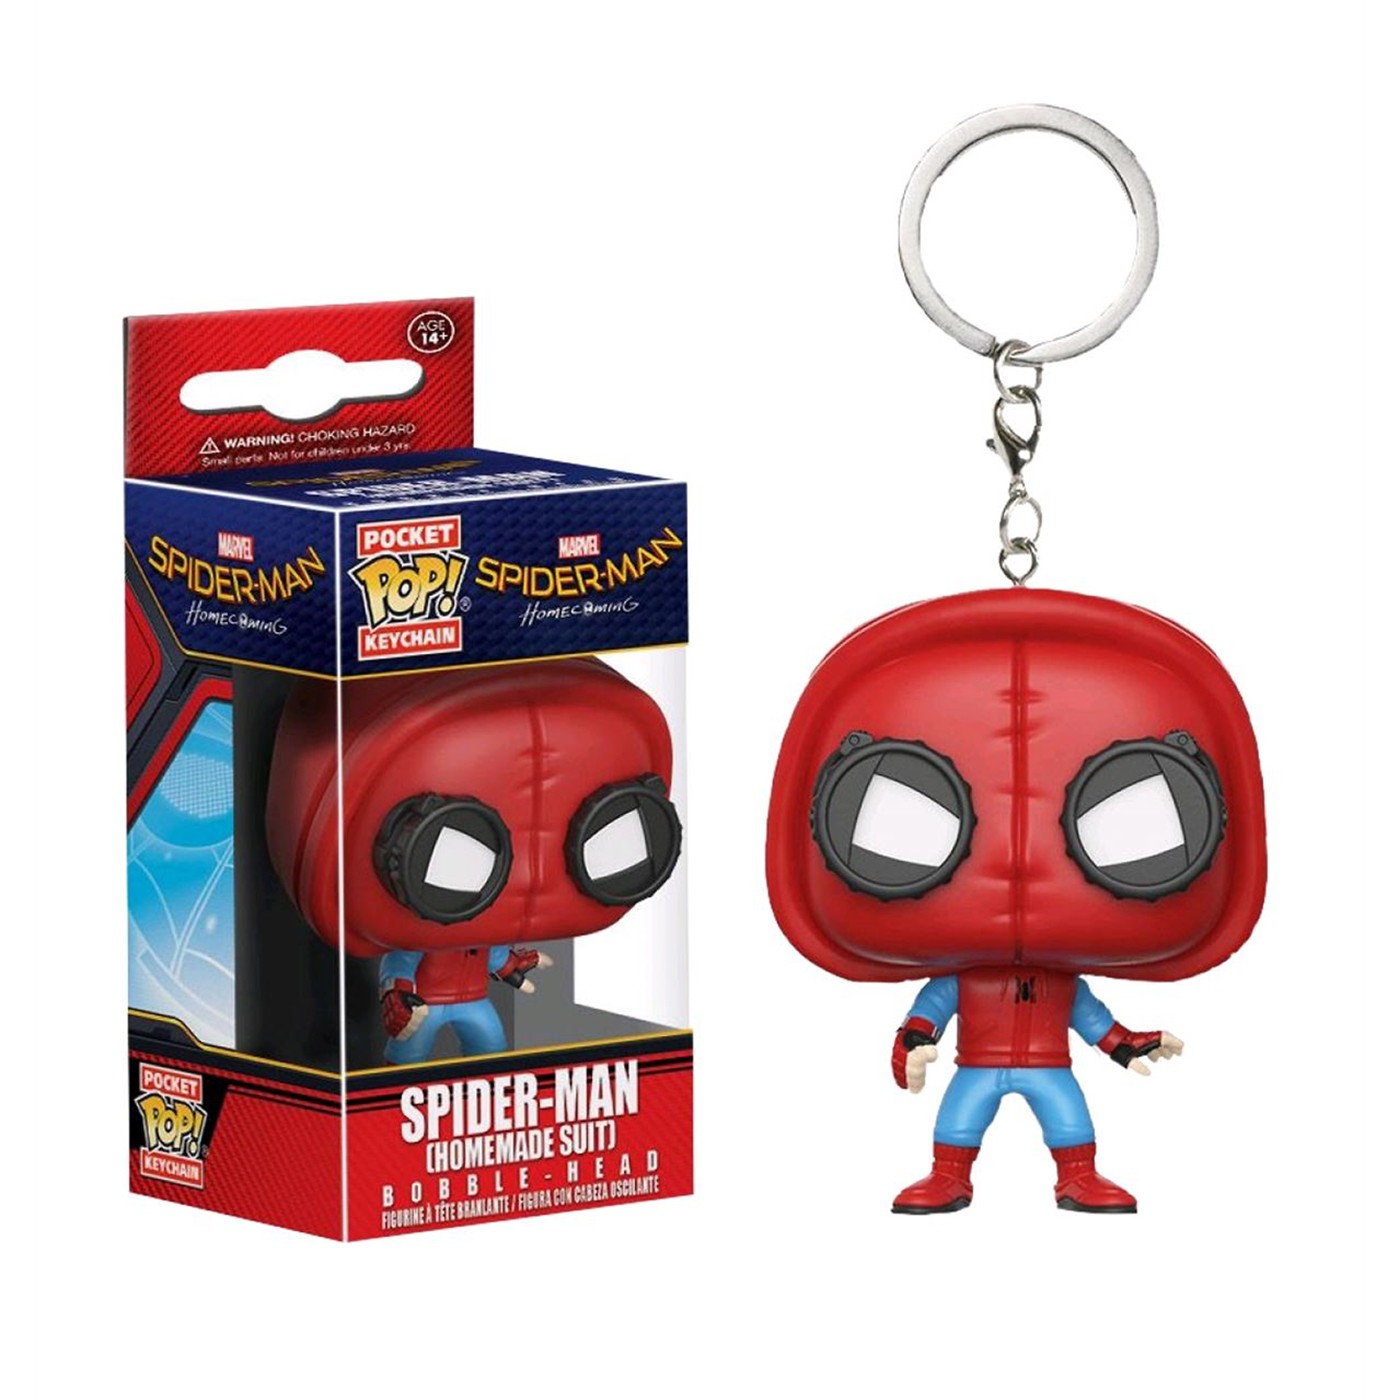 Spider-Man Homecoming Homemade Suit Funko Pop Keychain